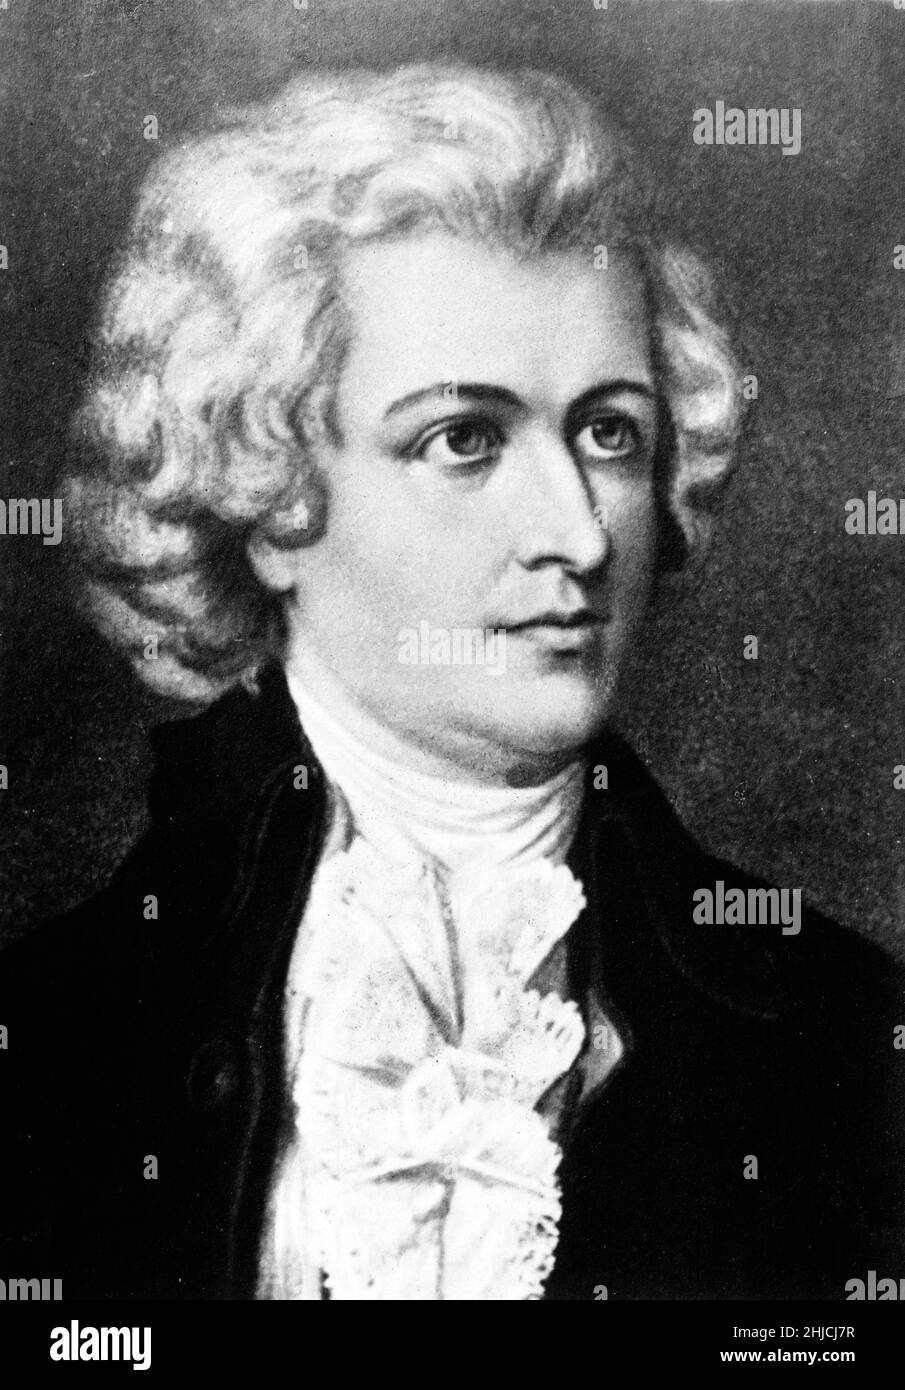 Wolfgang Amadeus Mozart 1756-1791) was a child prodigy and Austrian composer of the Classical era. Stock Photo